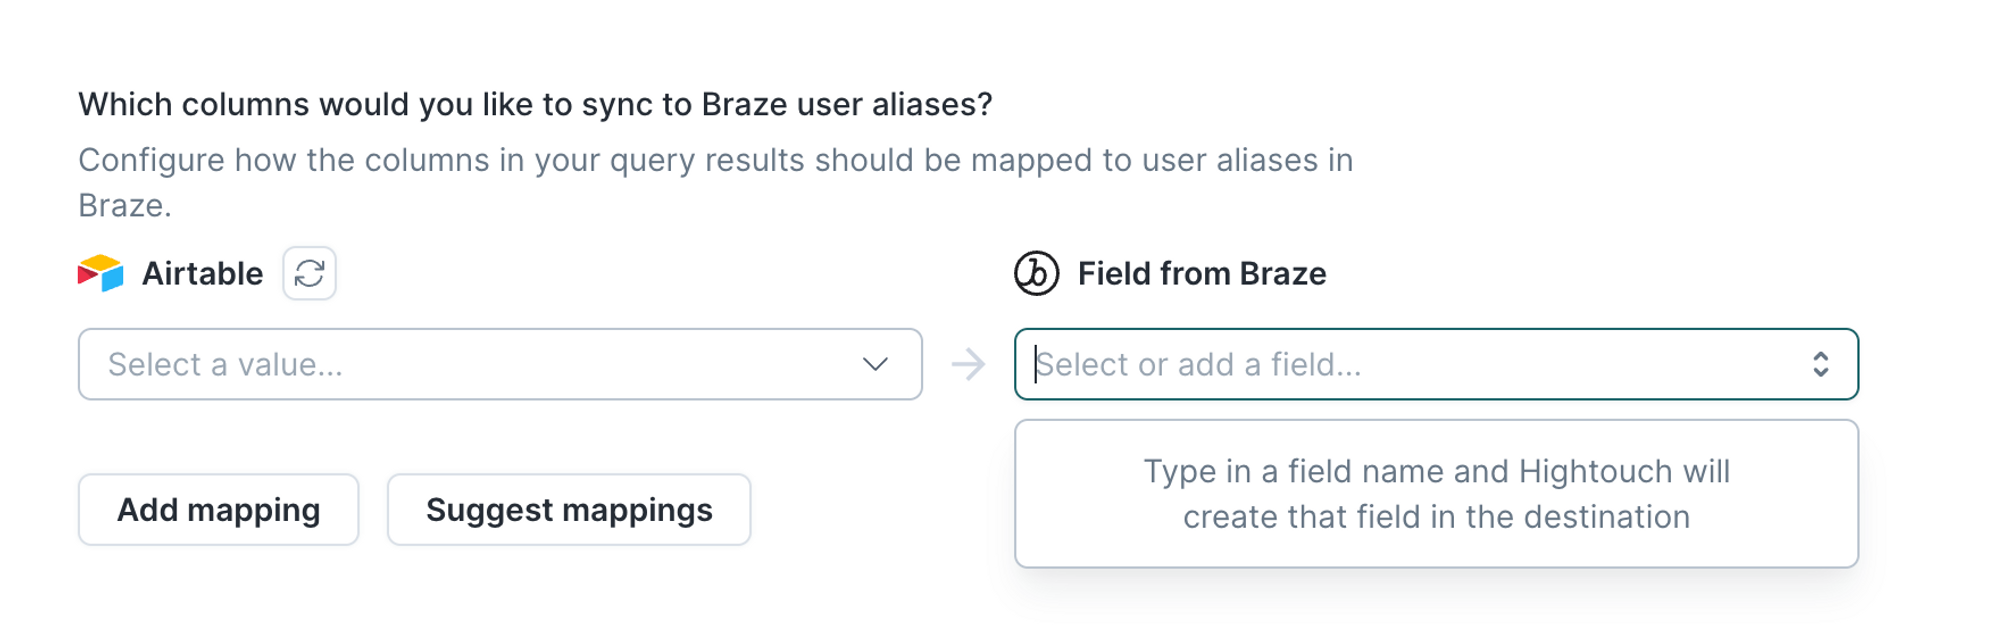 Field mapping to Braze user aliases